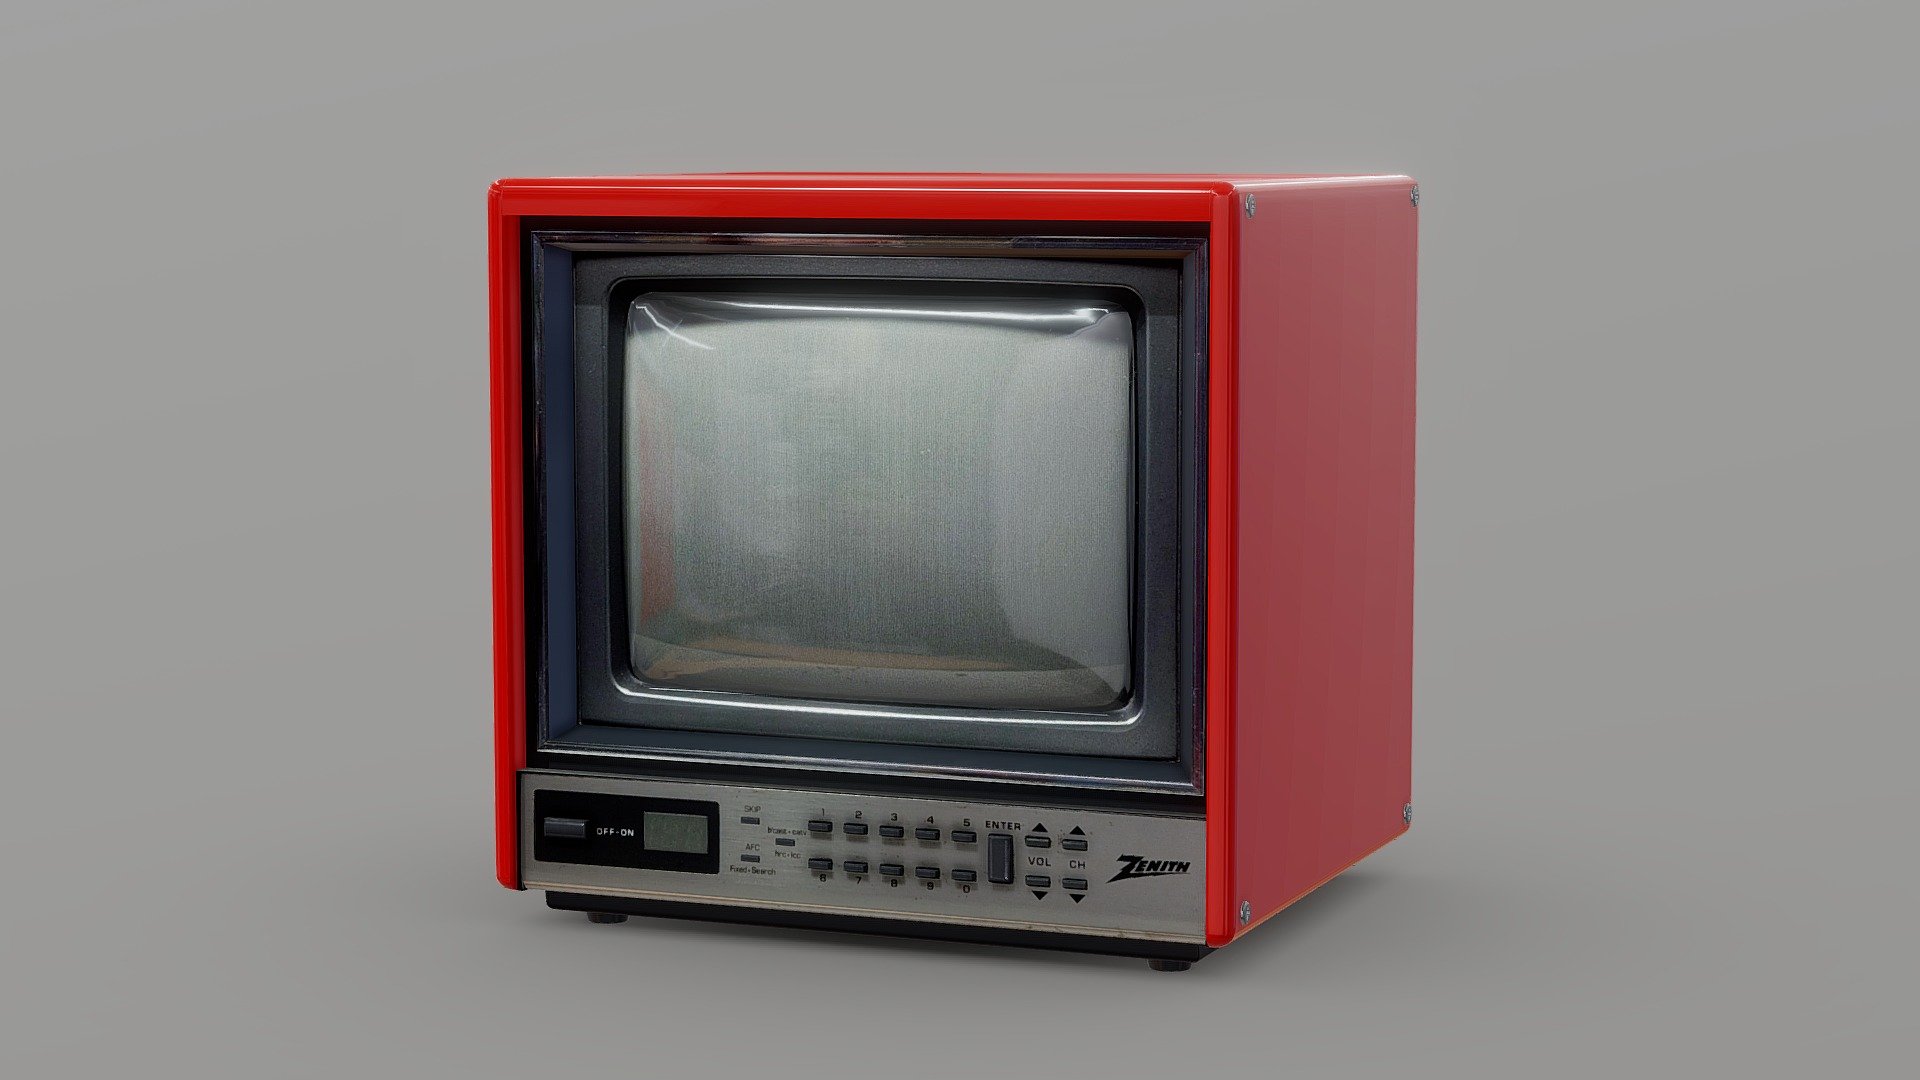 A Vintage Red Television Set From The 70's / 80's 3d model